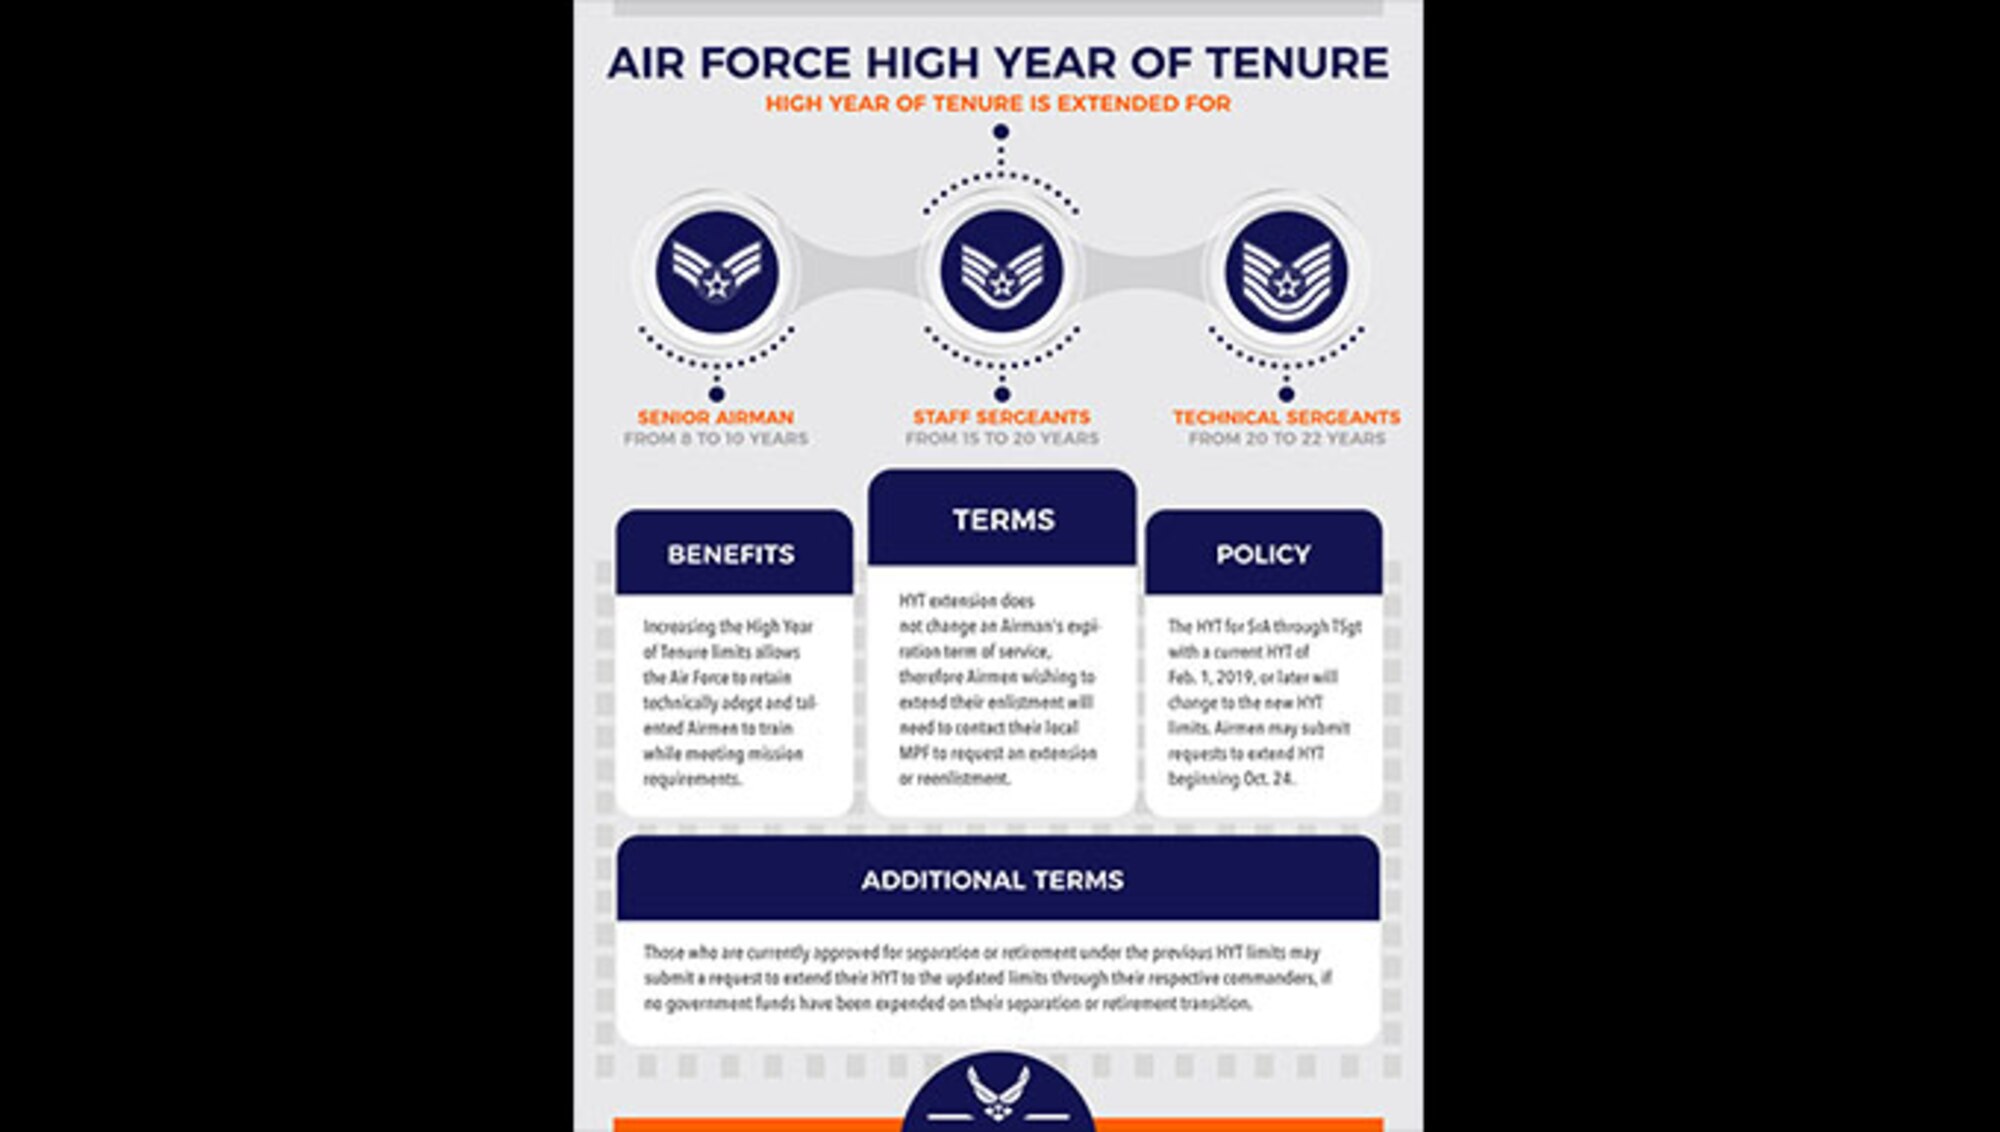 The Air Force is extending the high year of tenure for senior airmen through technical sergeants beginning Feb. 1, 2019.